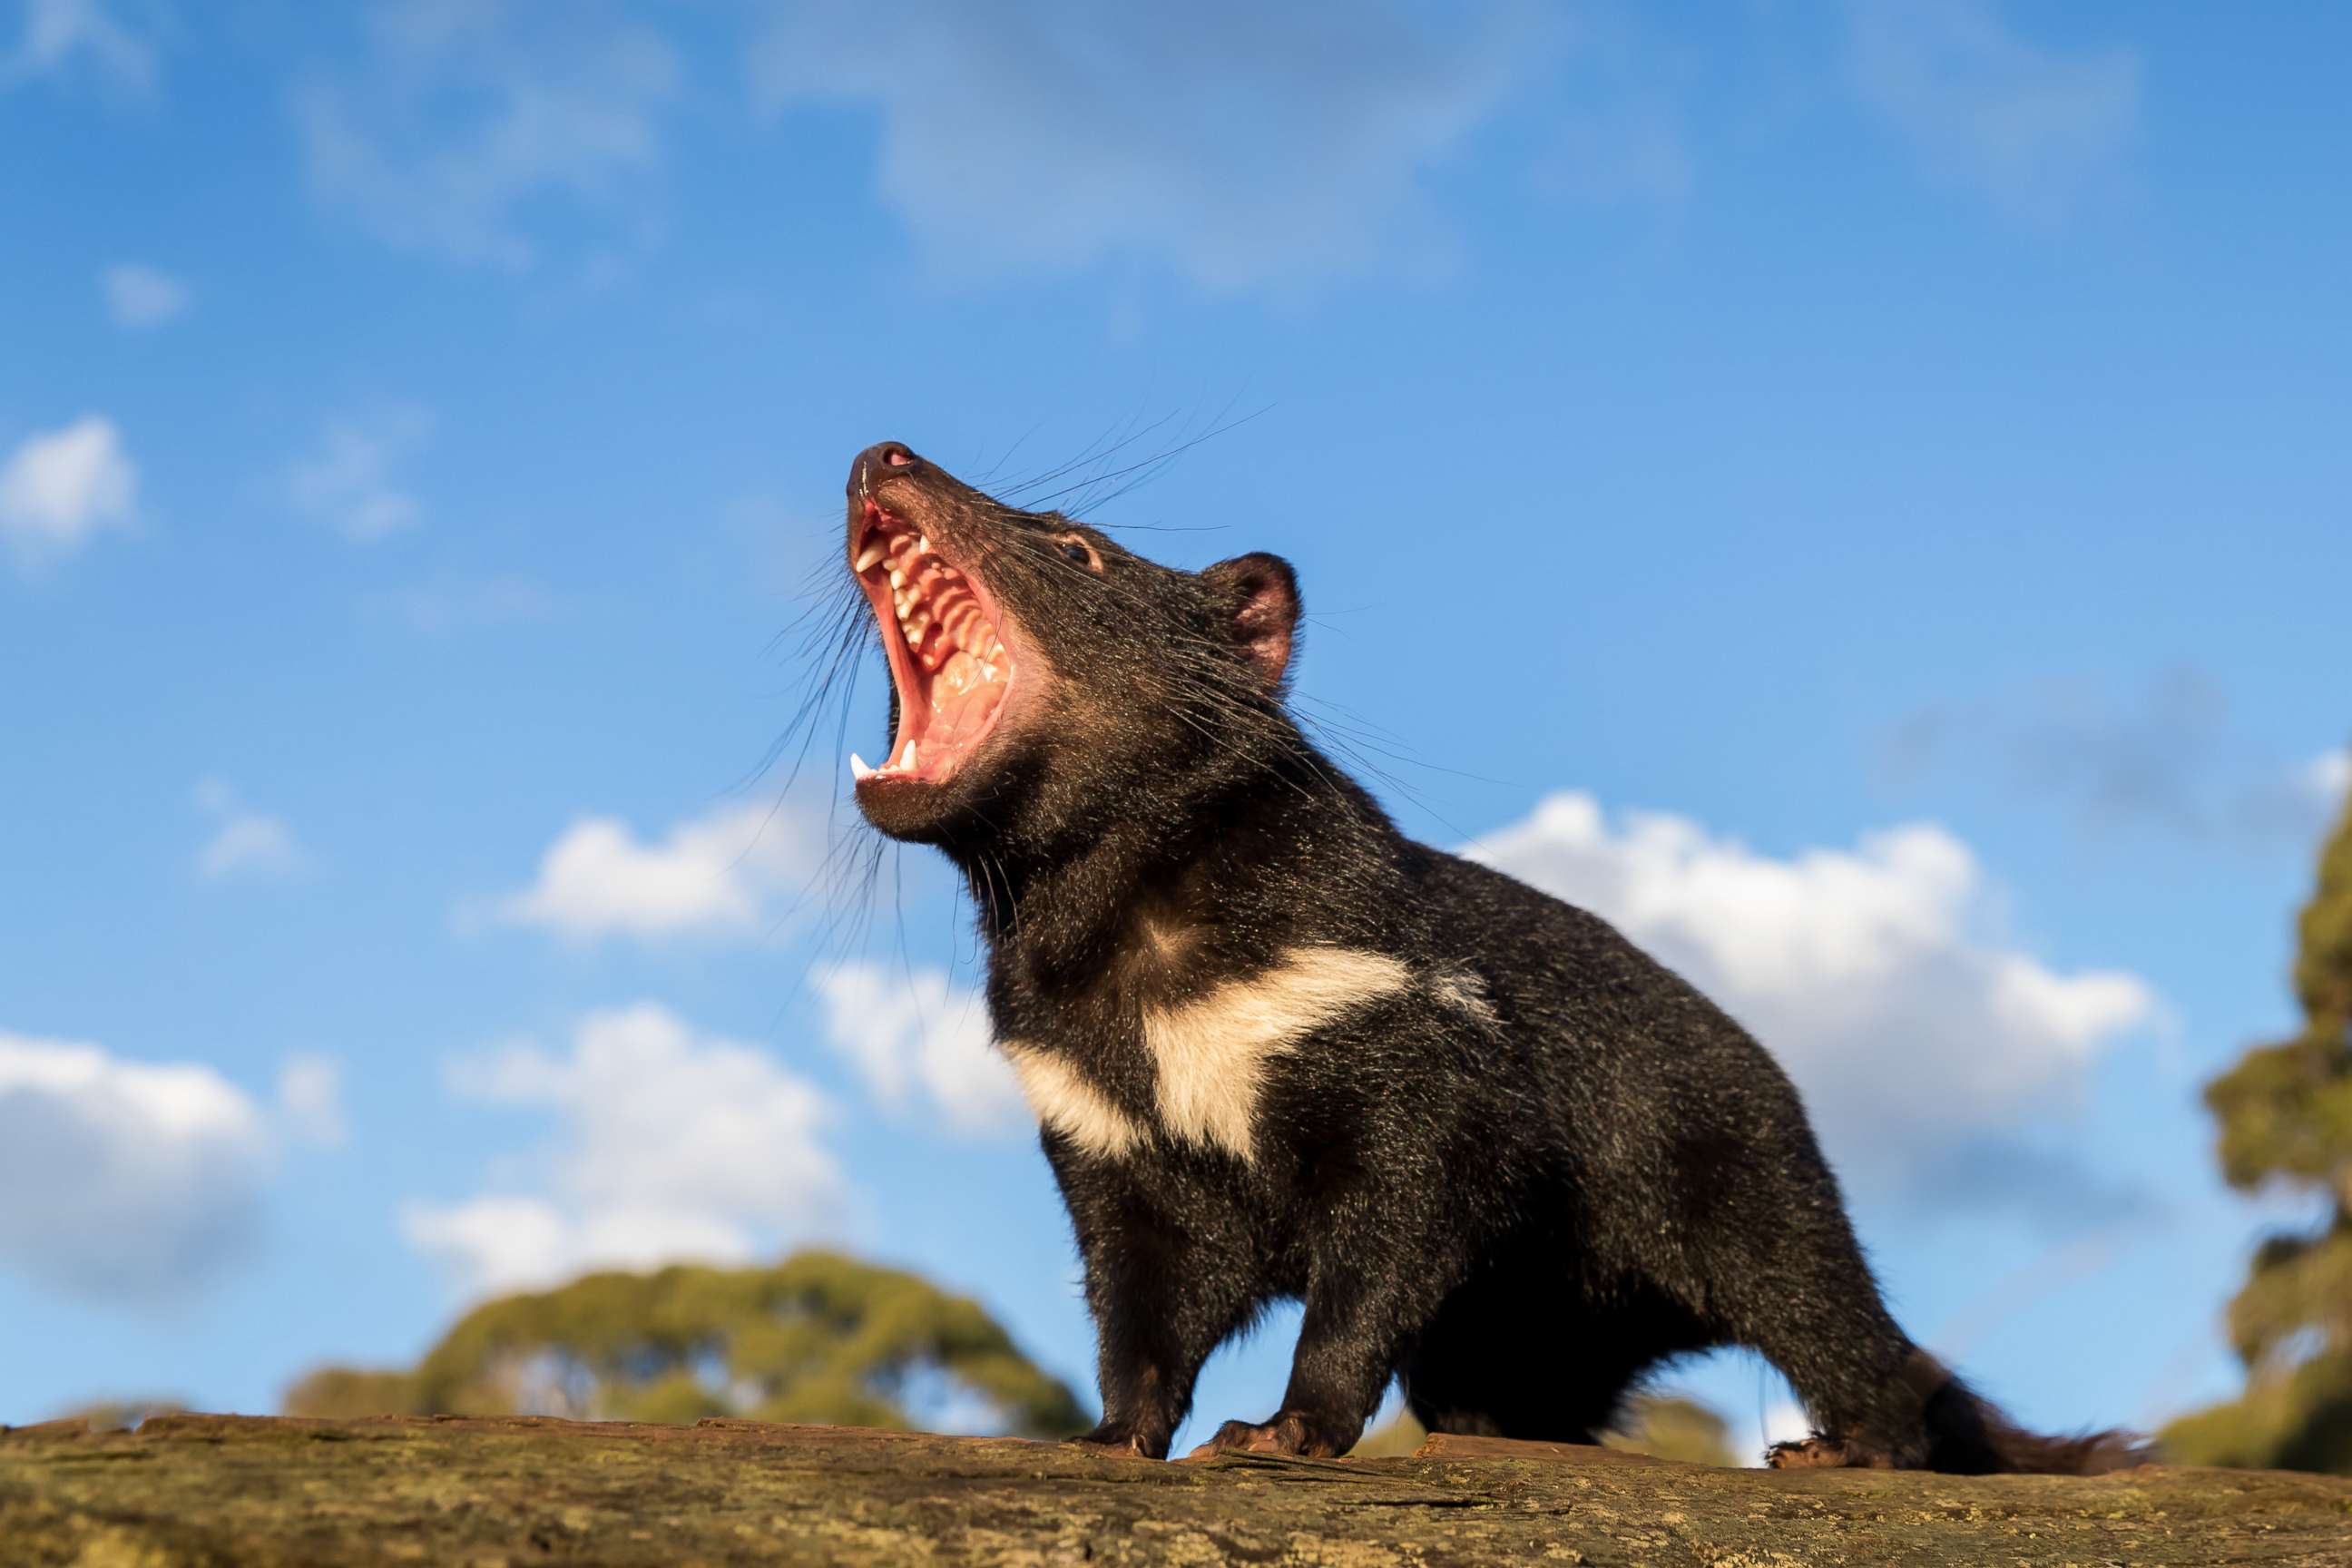 PHOTO: A Tasmanian devil stands in a wooded area in an undated handout photo.